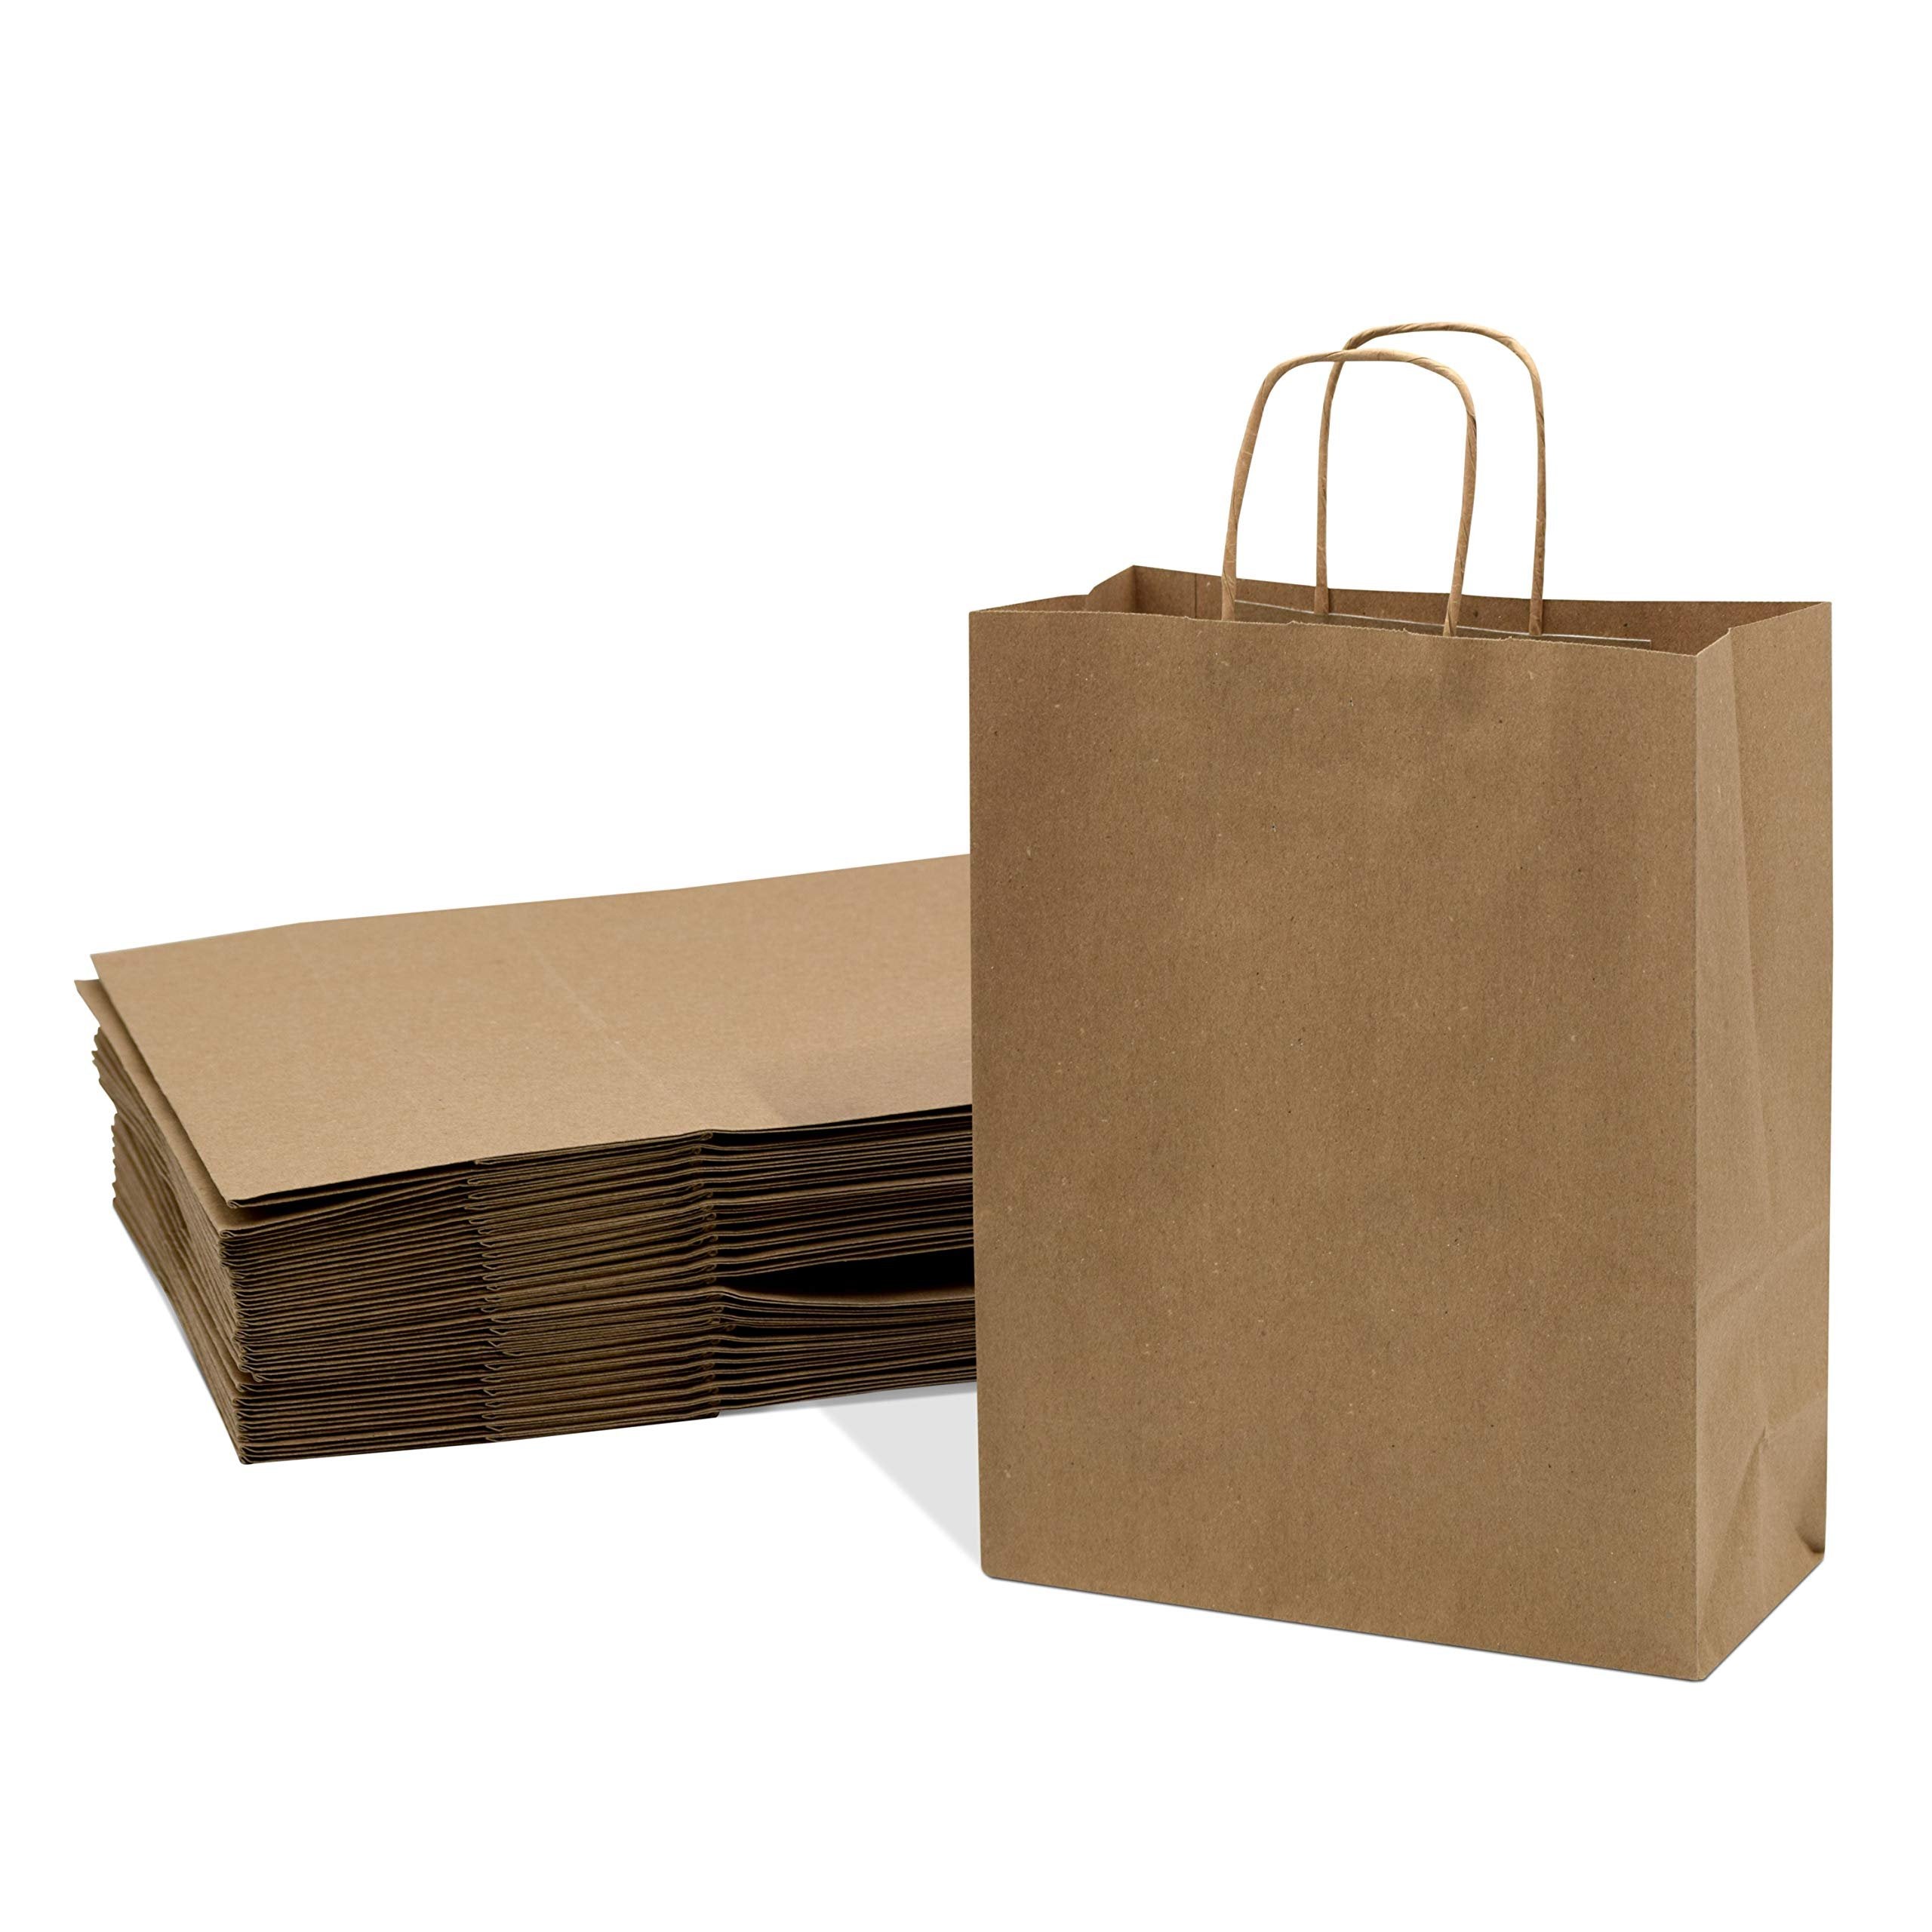 Brown Kraft Paper Bags with Handles, Birthday Parties, Restaurant takeouts, Shopping, Merchandise, Party, Retail, Gift Bags 10x5x13"